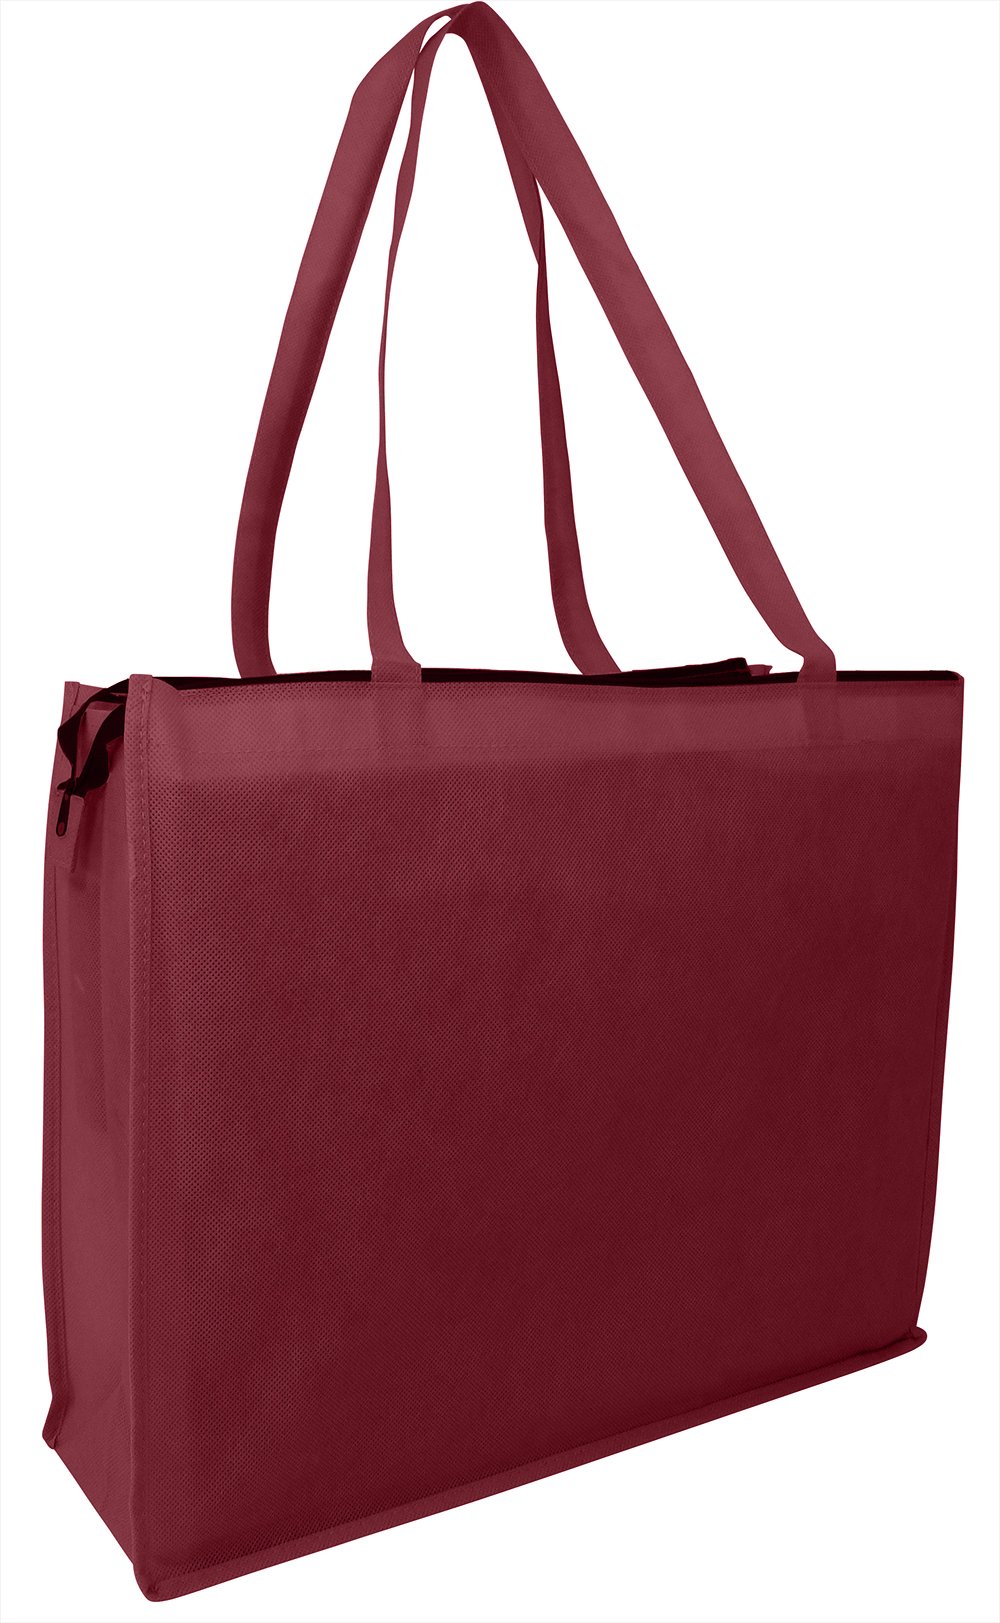 Zippered Large Tote Bags - Reusable Grocery Bags - GN61